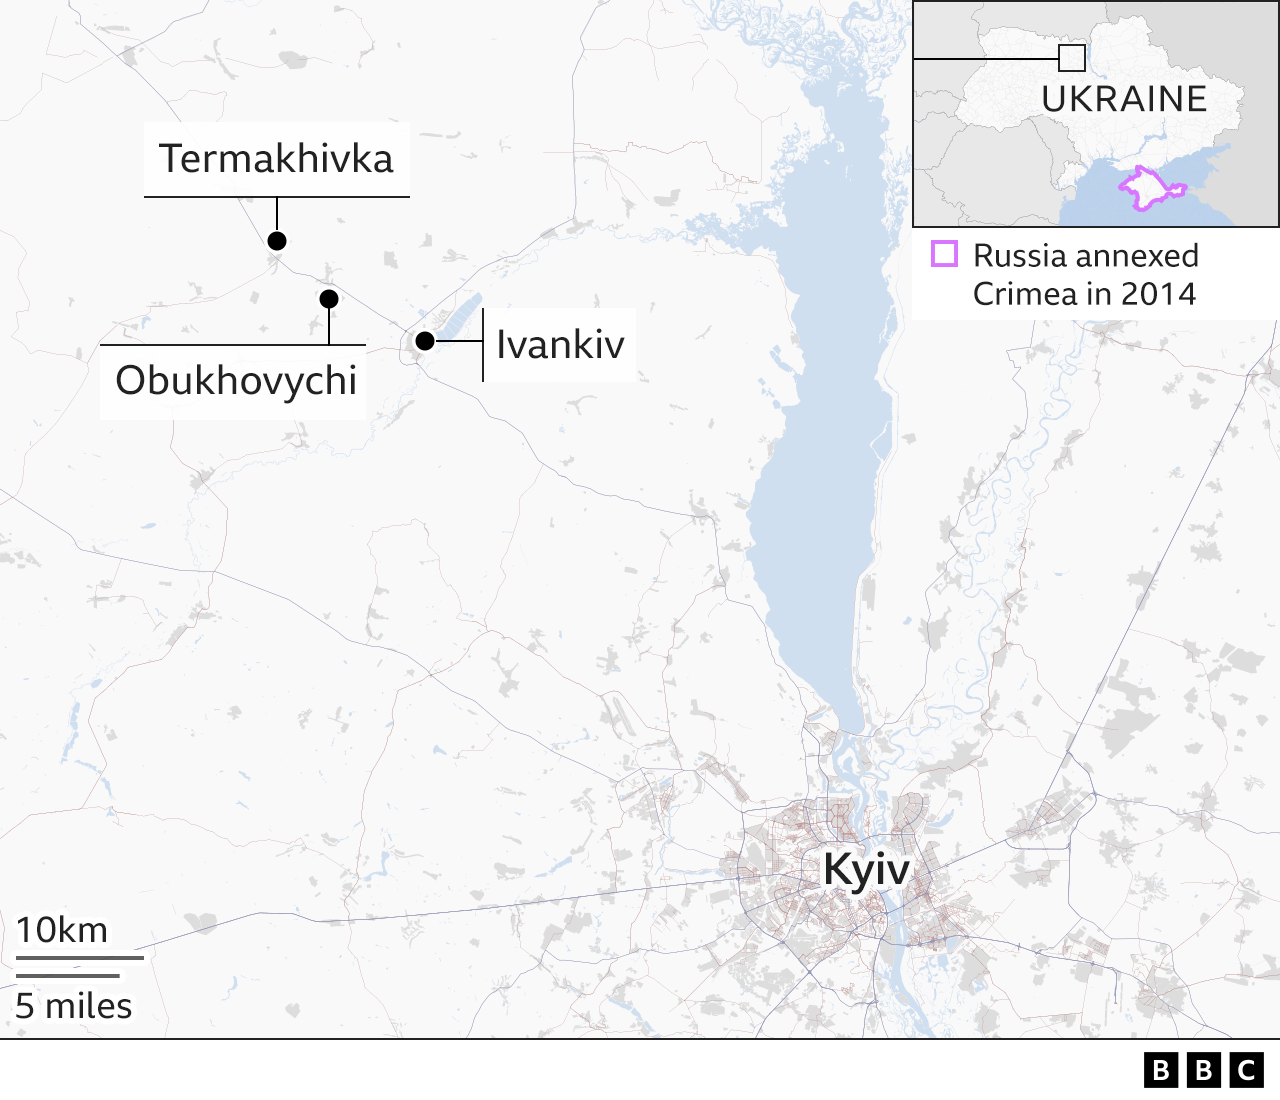 Image shows map of villages north of Kyiv